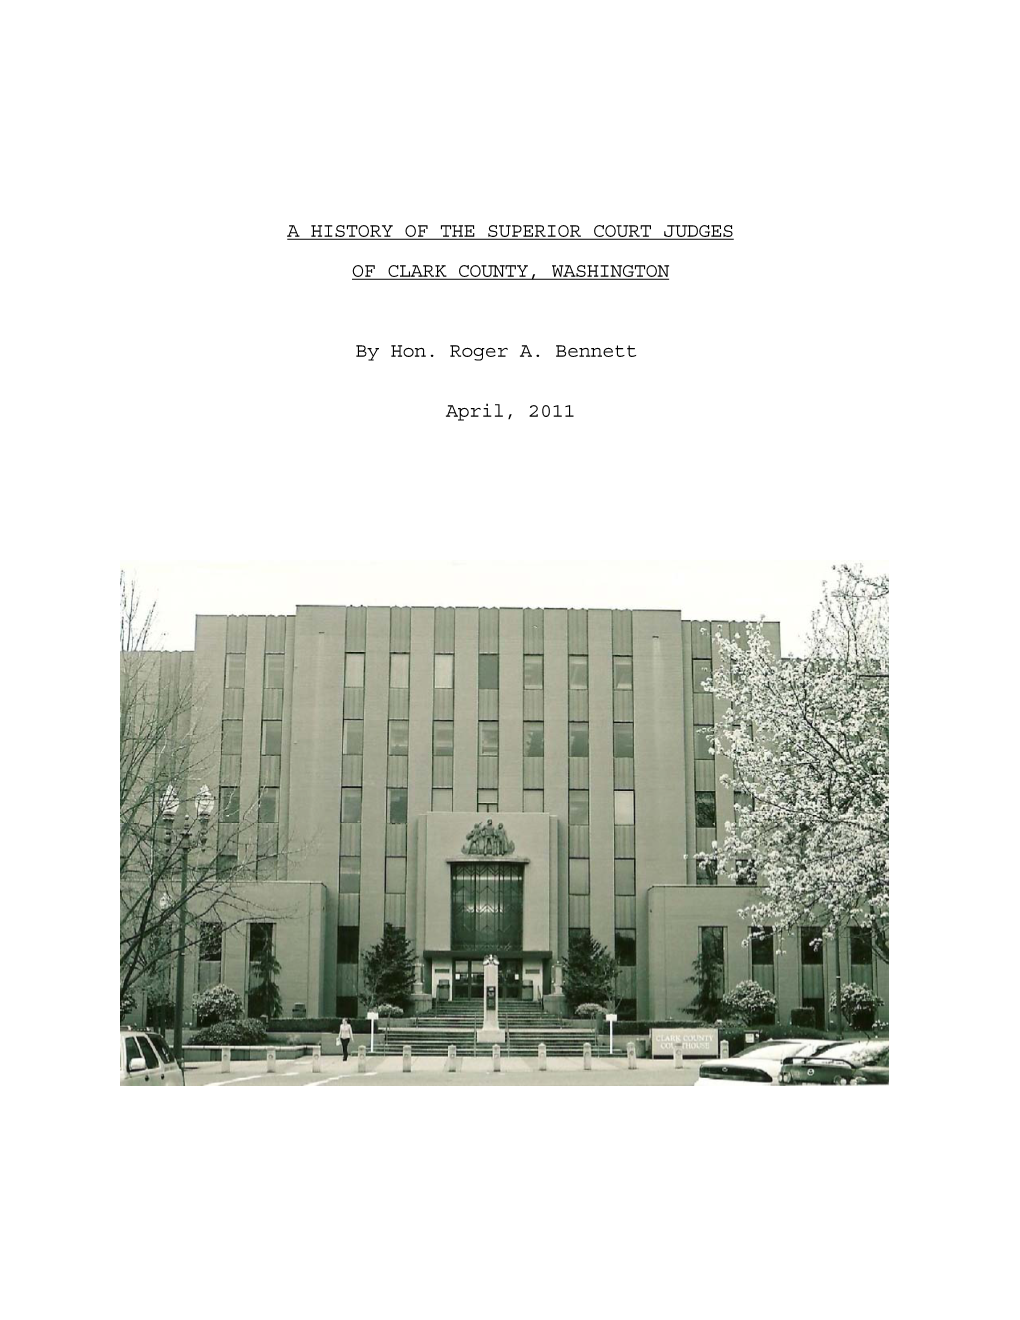 A HISTORY of the SUPERIOR COURT JUDGES of CLARK COUNTY, WASHINGTON by Hon. Roger A. Bennett April, 2011